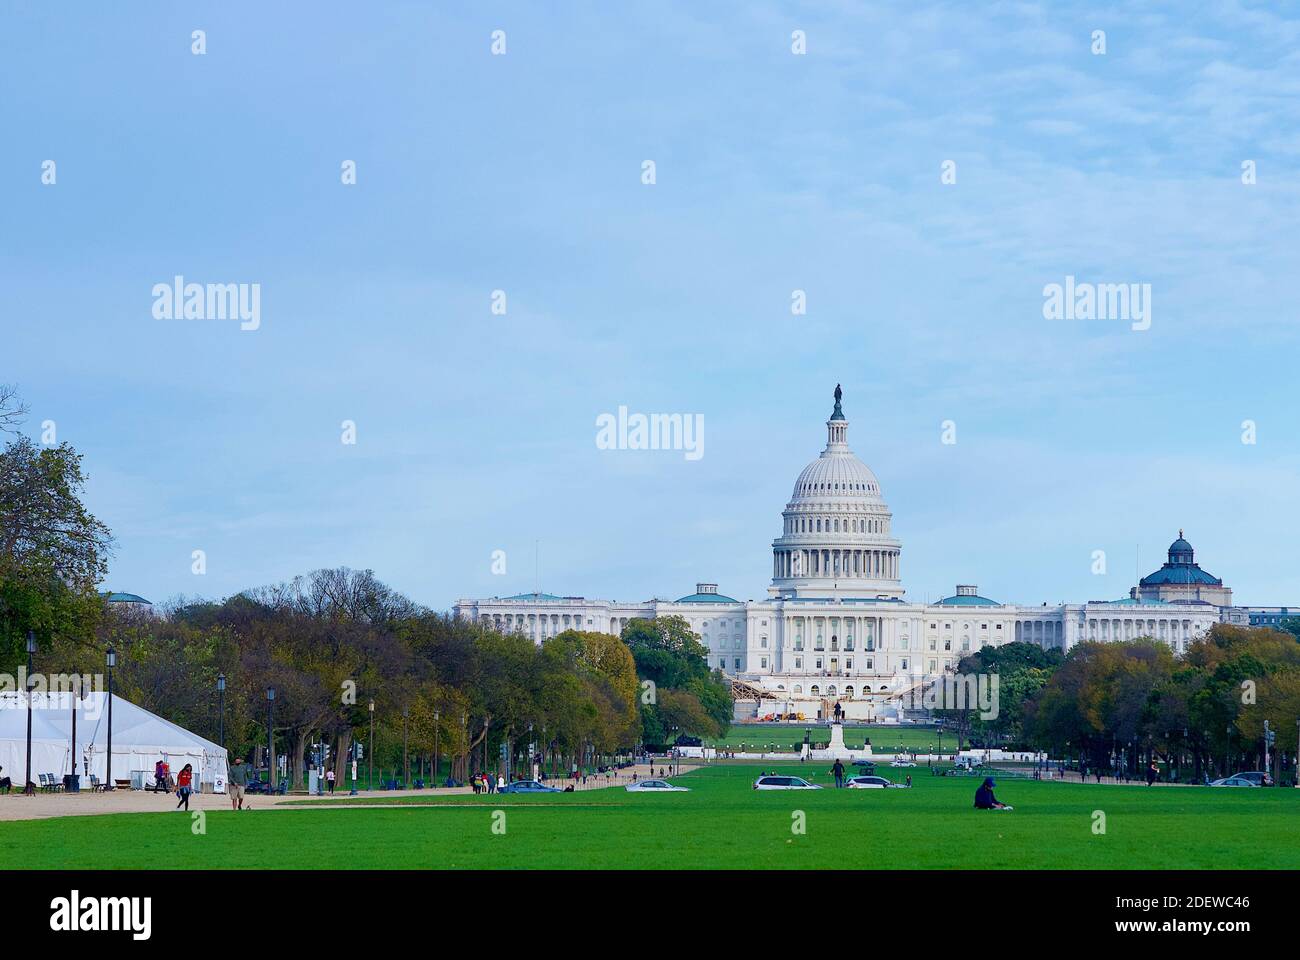 Washington, D.C. - November 3, 2020: Tourists enjoy an autumn afternoon on the National Mall with the U.S. Capitol building seen in the background. Stock Photo